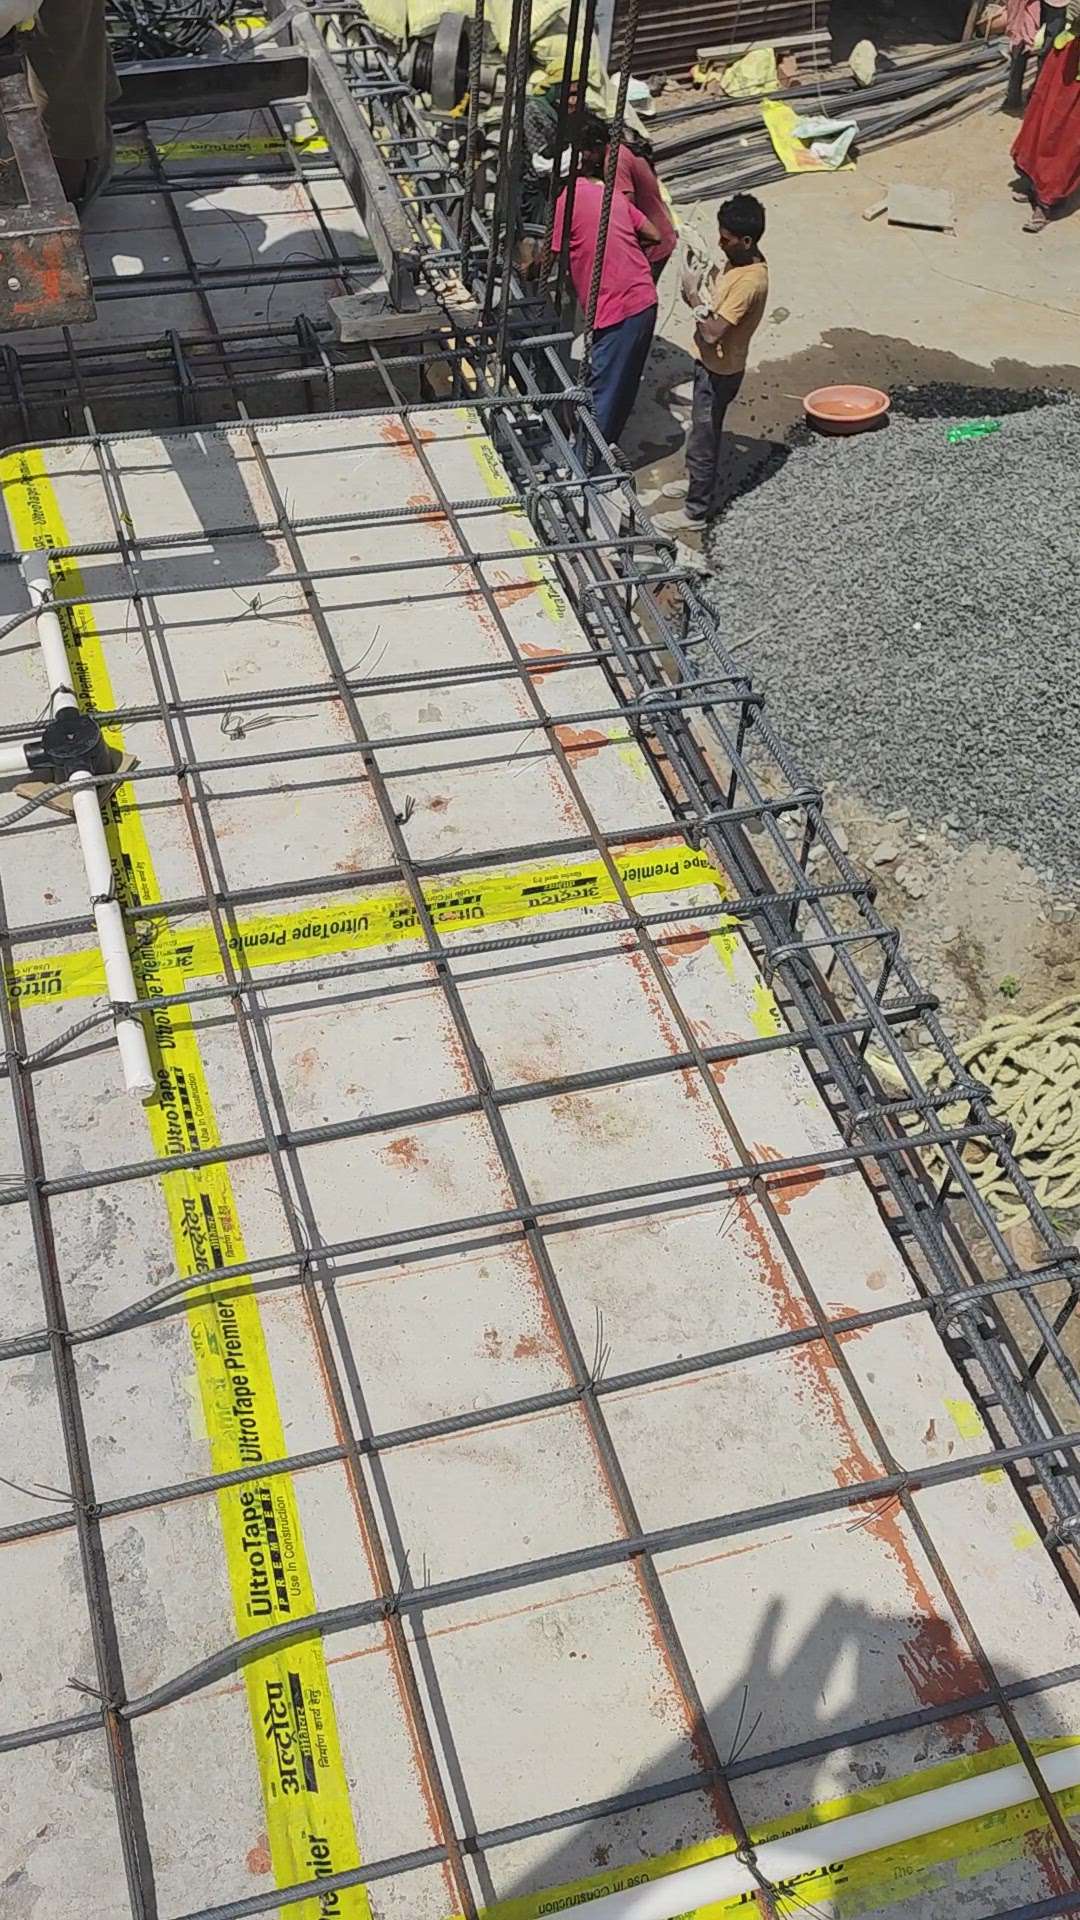 slab reinforcement. 
DM us for enquiry.
Contact us on 7415834146 for your house design & construction. 
Follow us for more updates.
. 
. 
. 
. 
. 
. 
#civilengineering #engineering #construction #civil #architecture #engineer #civilengineer #building #design #mechanicalengineering #engineers #civilconstruction #civilengineers #concrete #structuralengineering #engenhariacivil #engenharia #civilengineeringlife